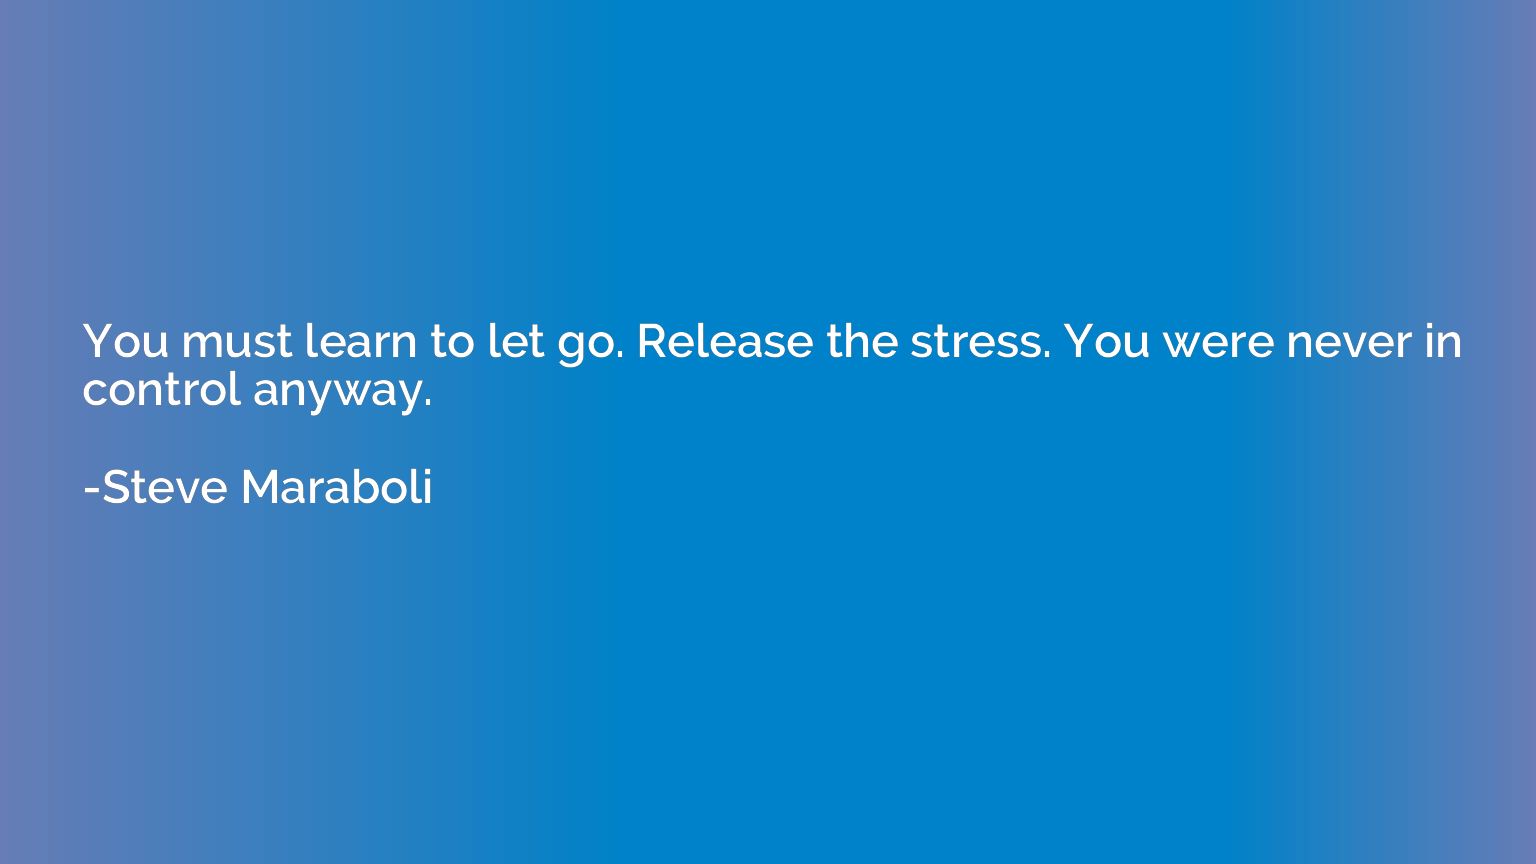 You must learn to let go. Release the stress. You were never